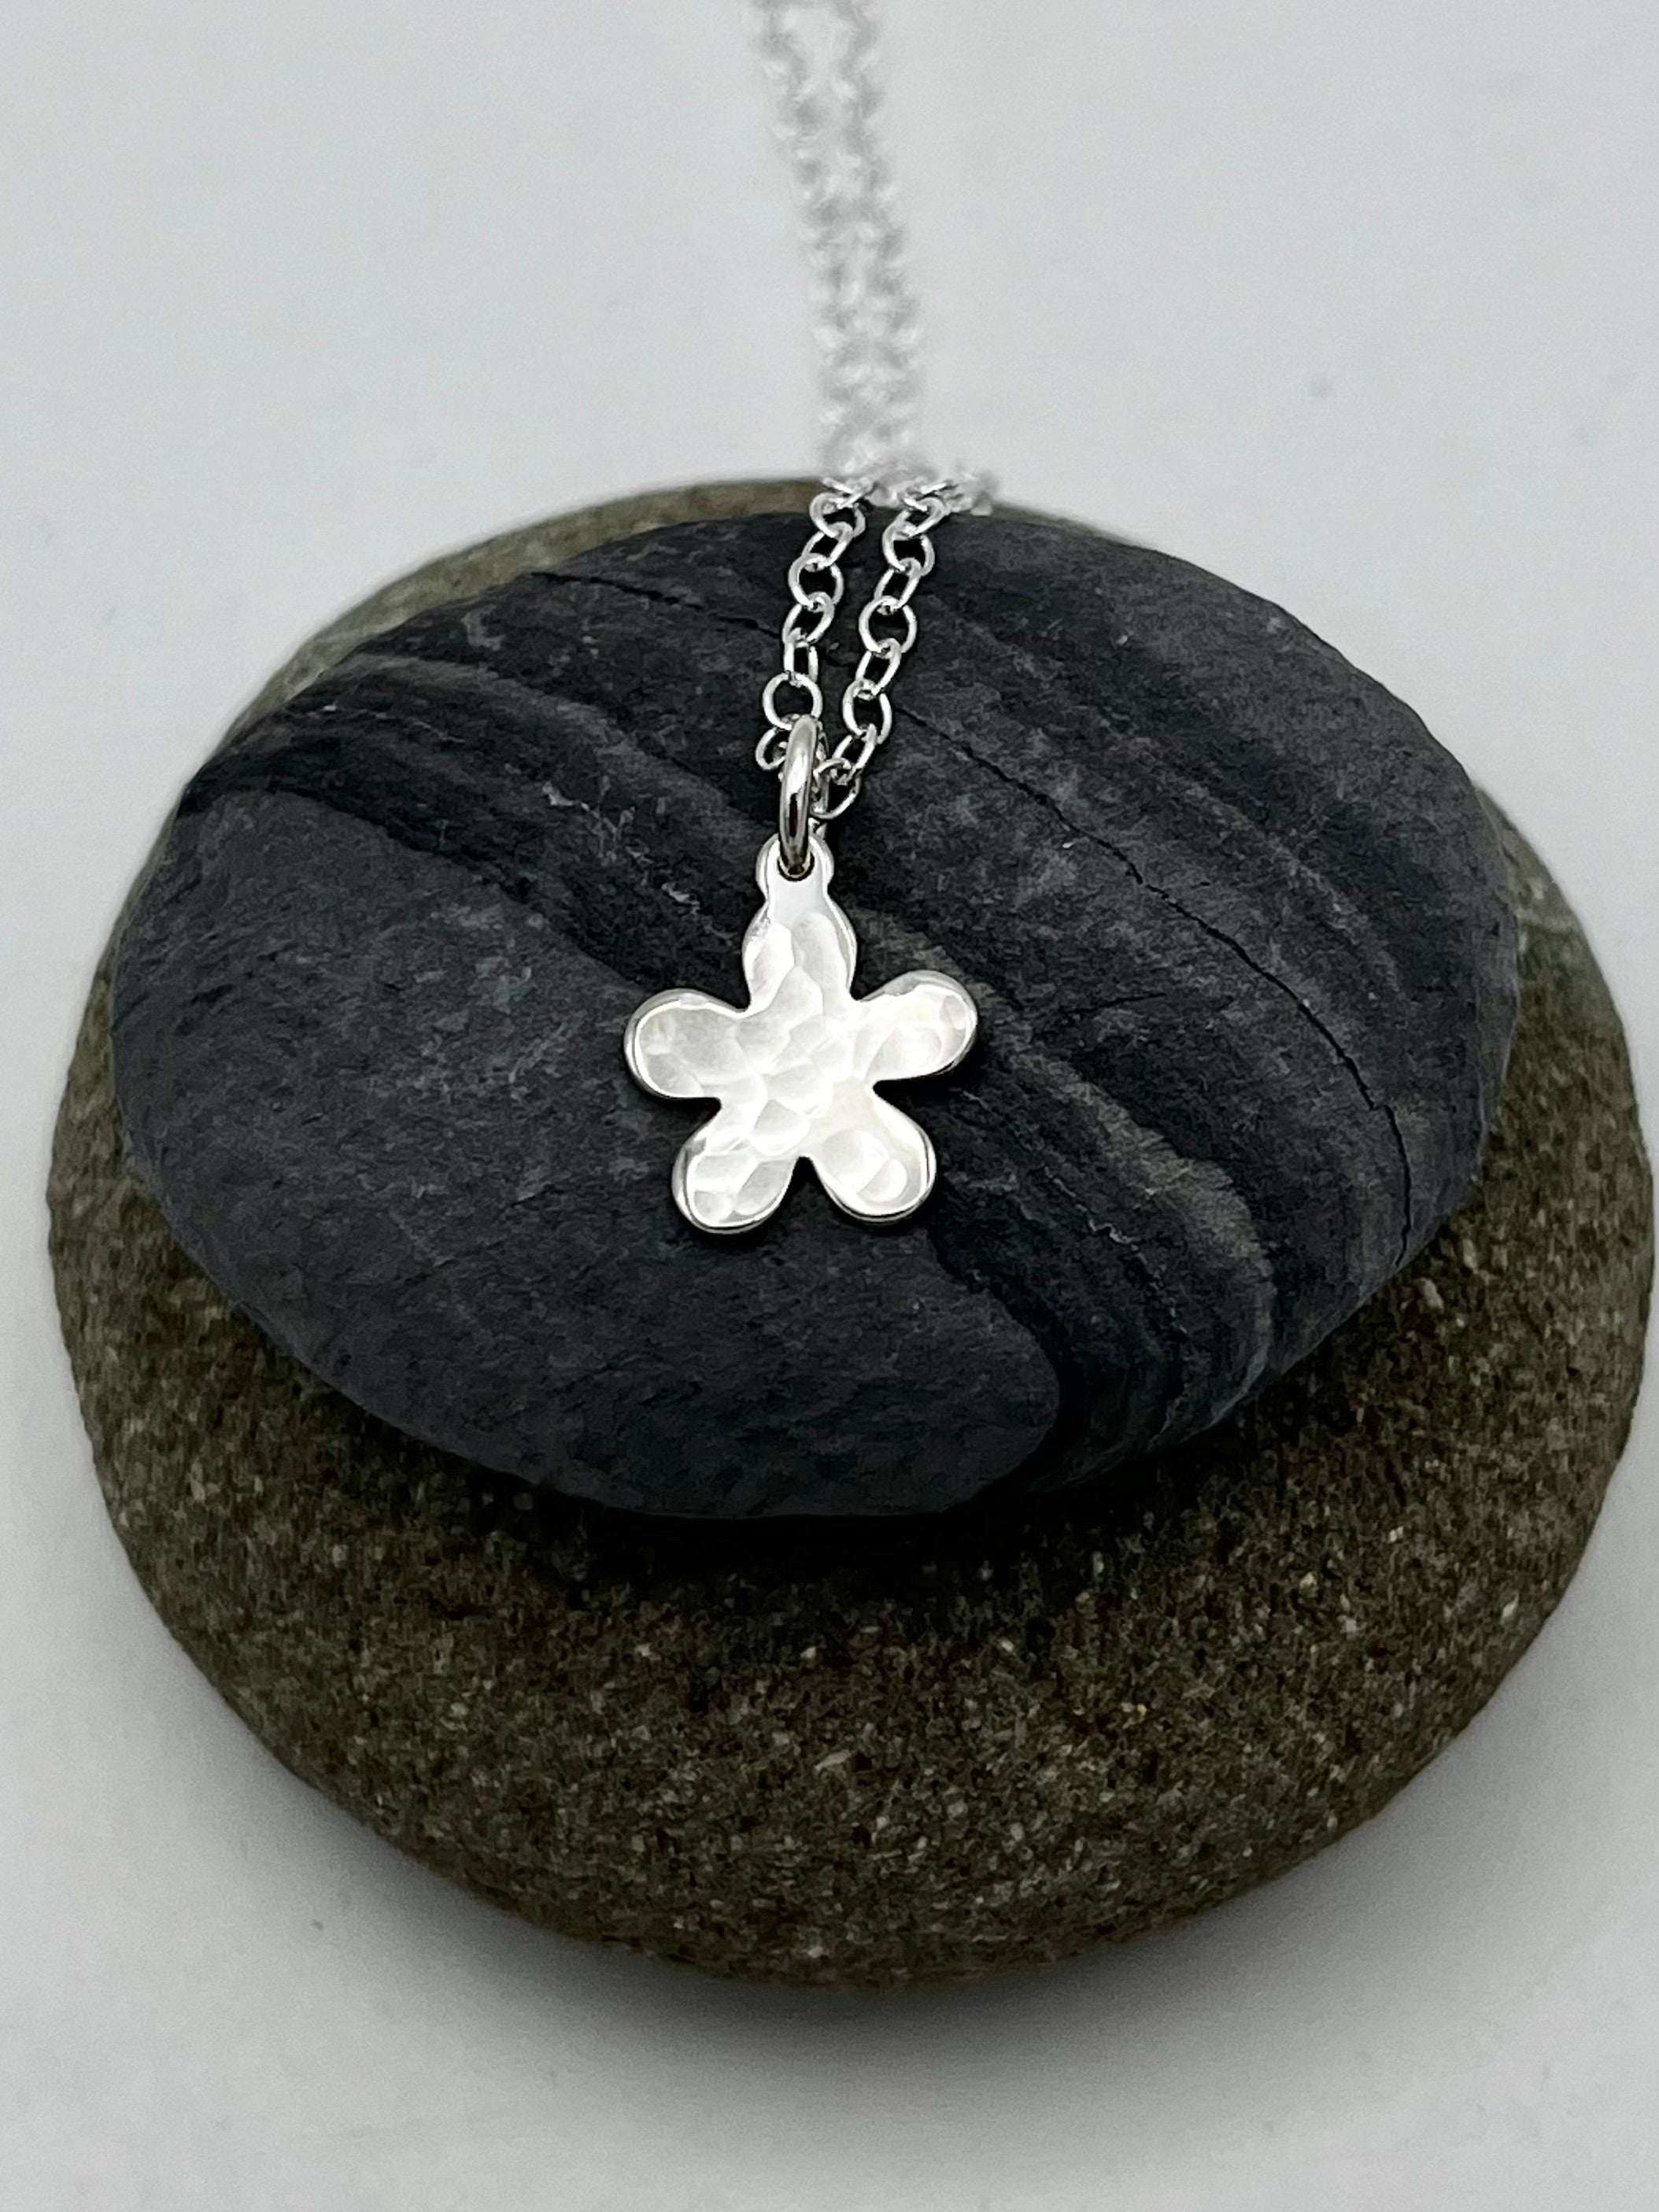 Single flower pendant 10mm wide hammered finish on 16mm trace chain